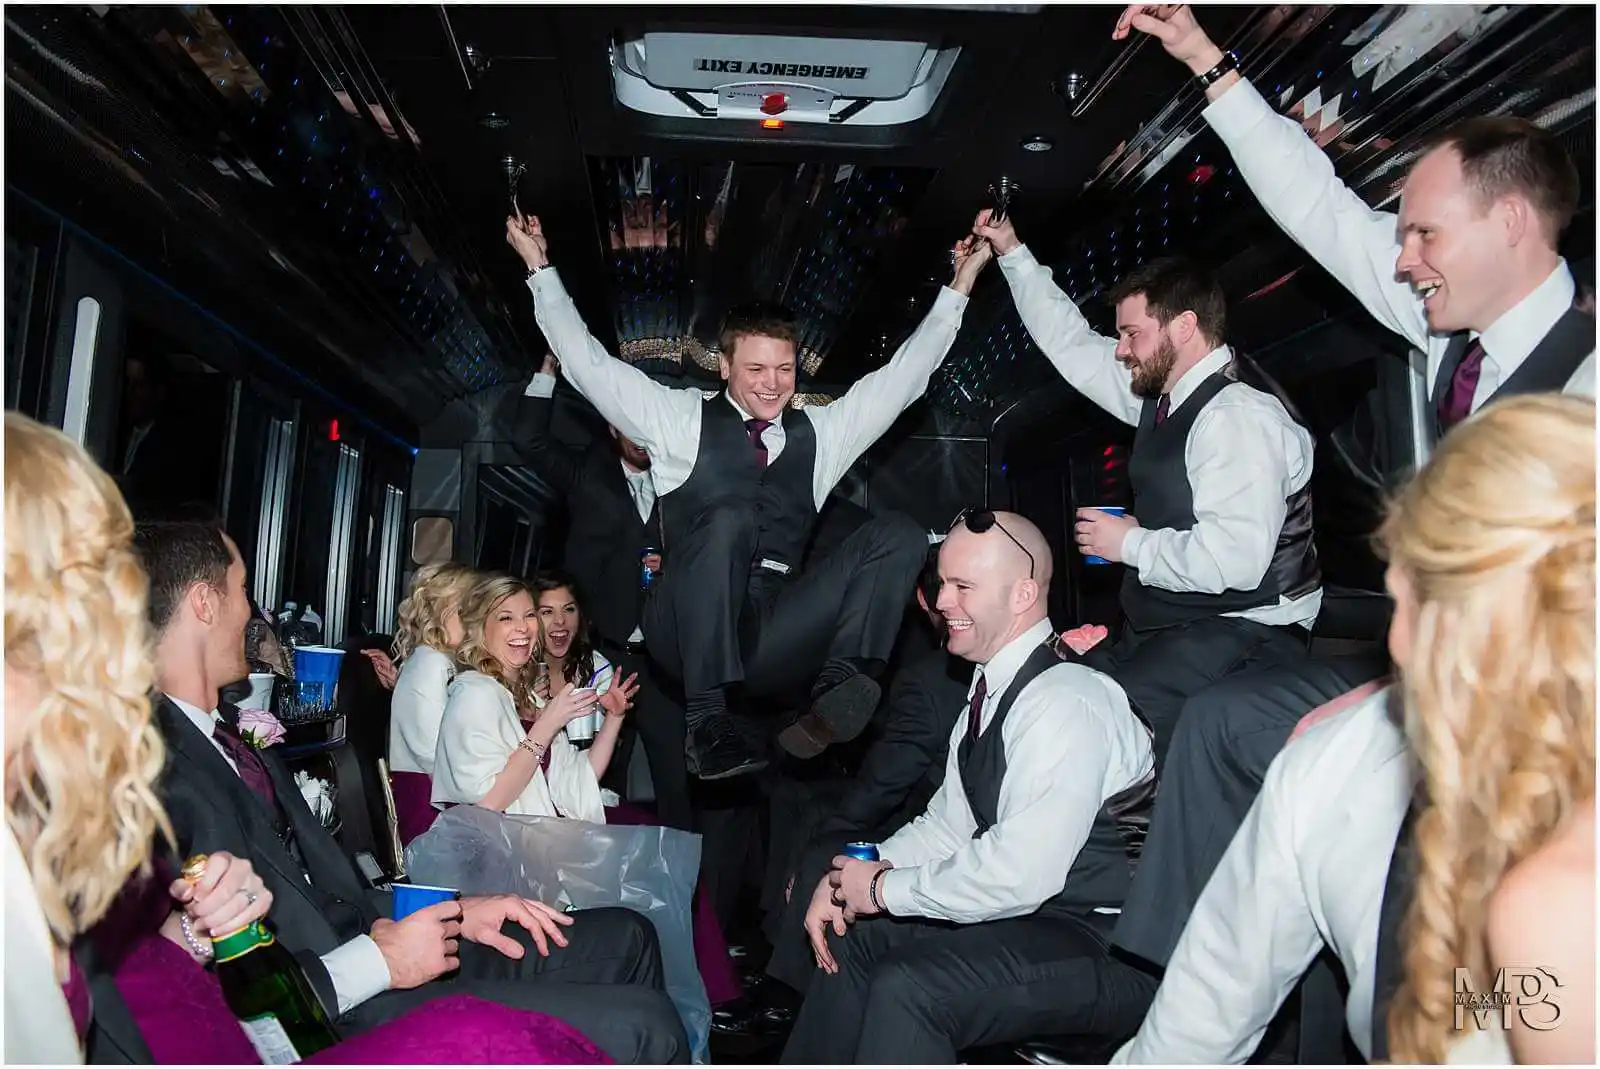 Energetic friends enjoying a lively party in a luxury bus.